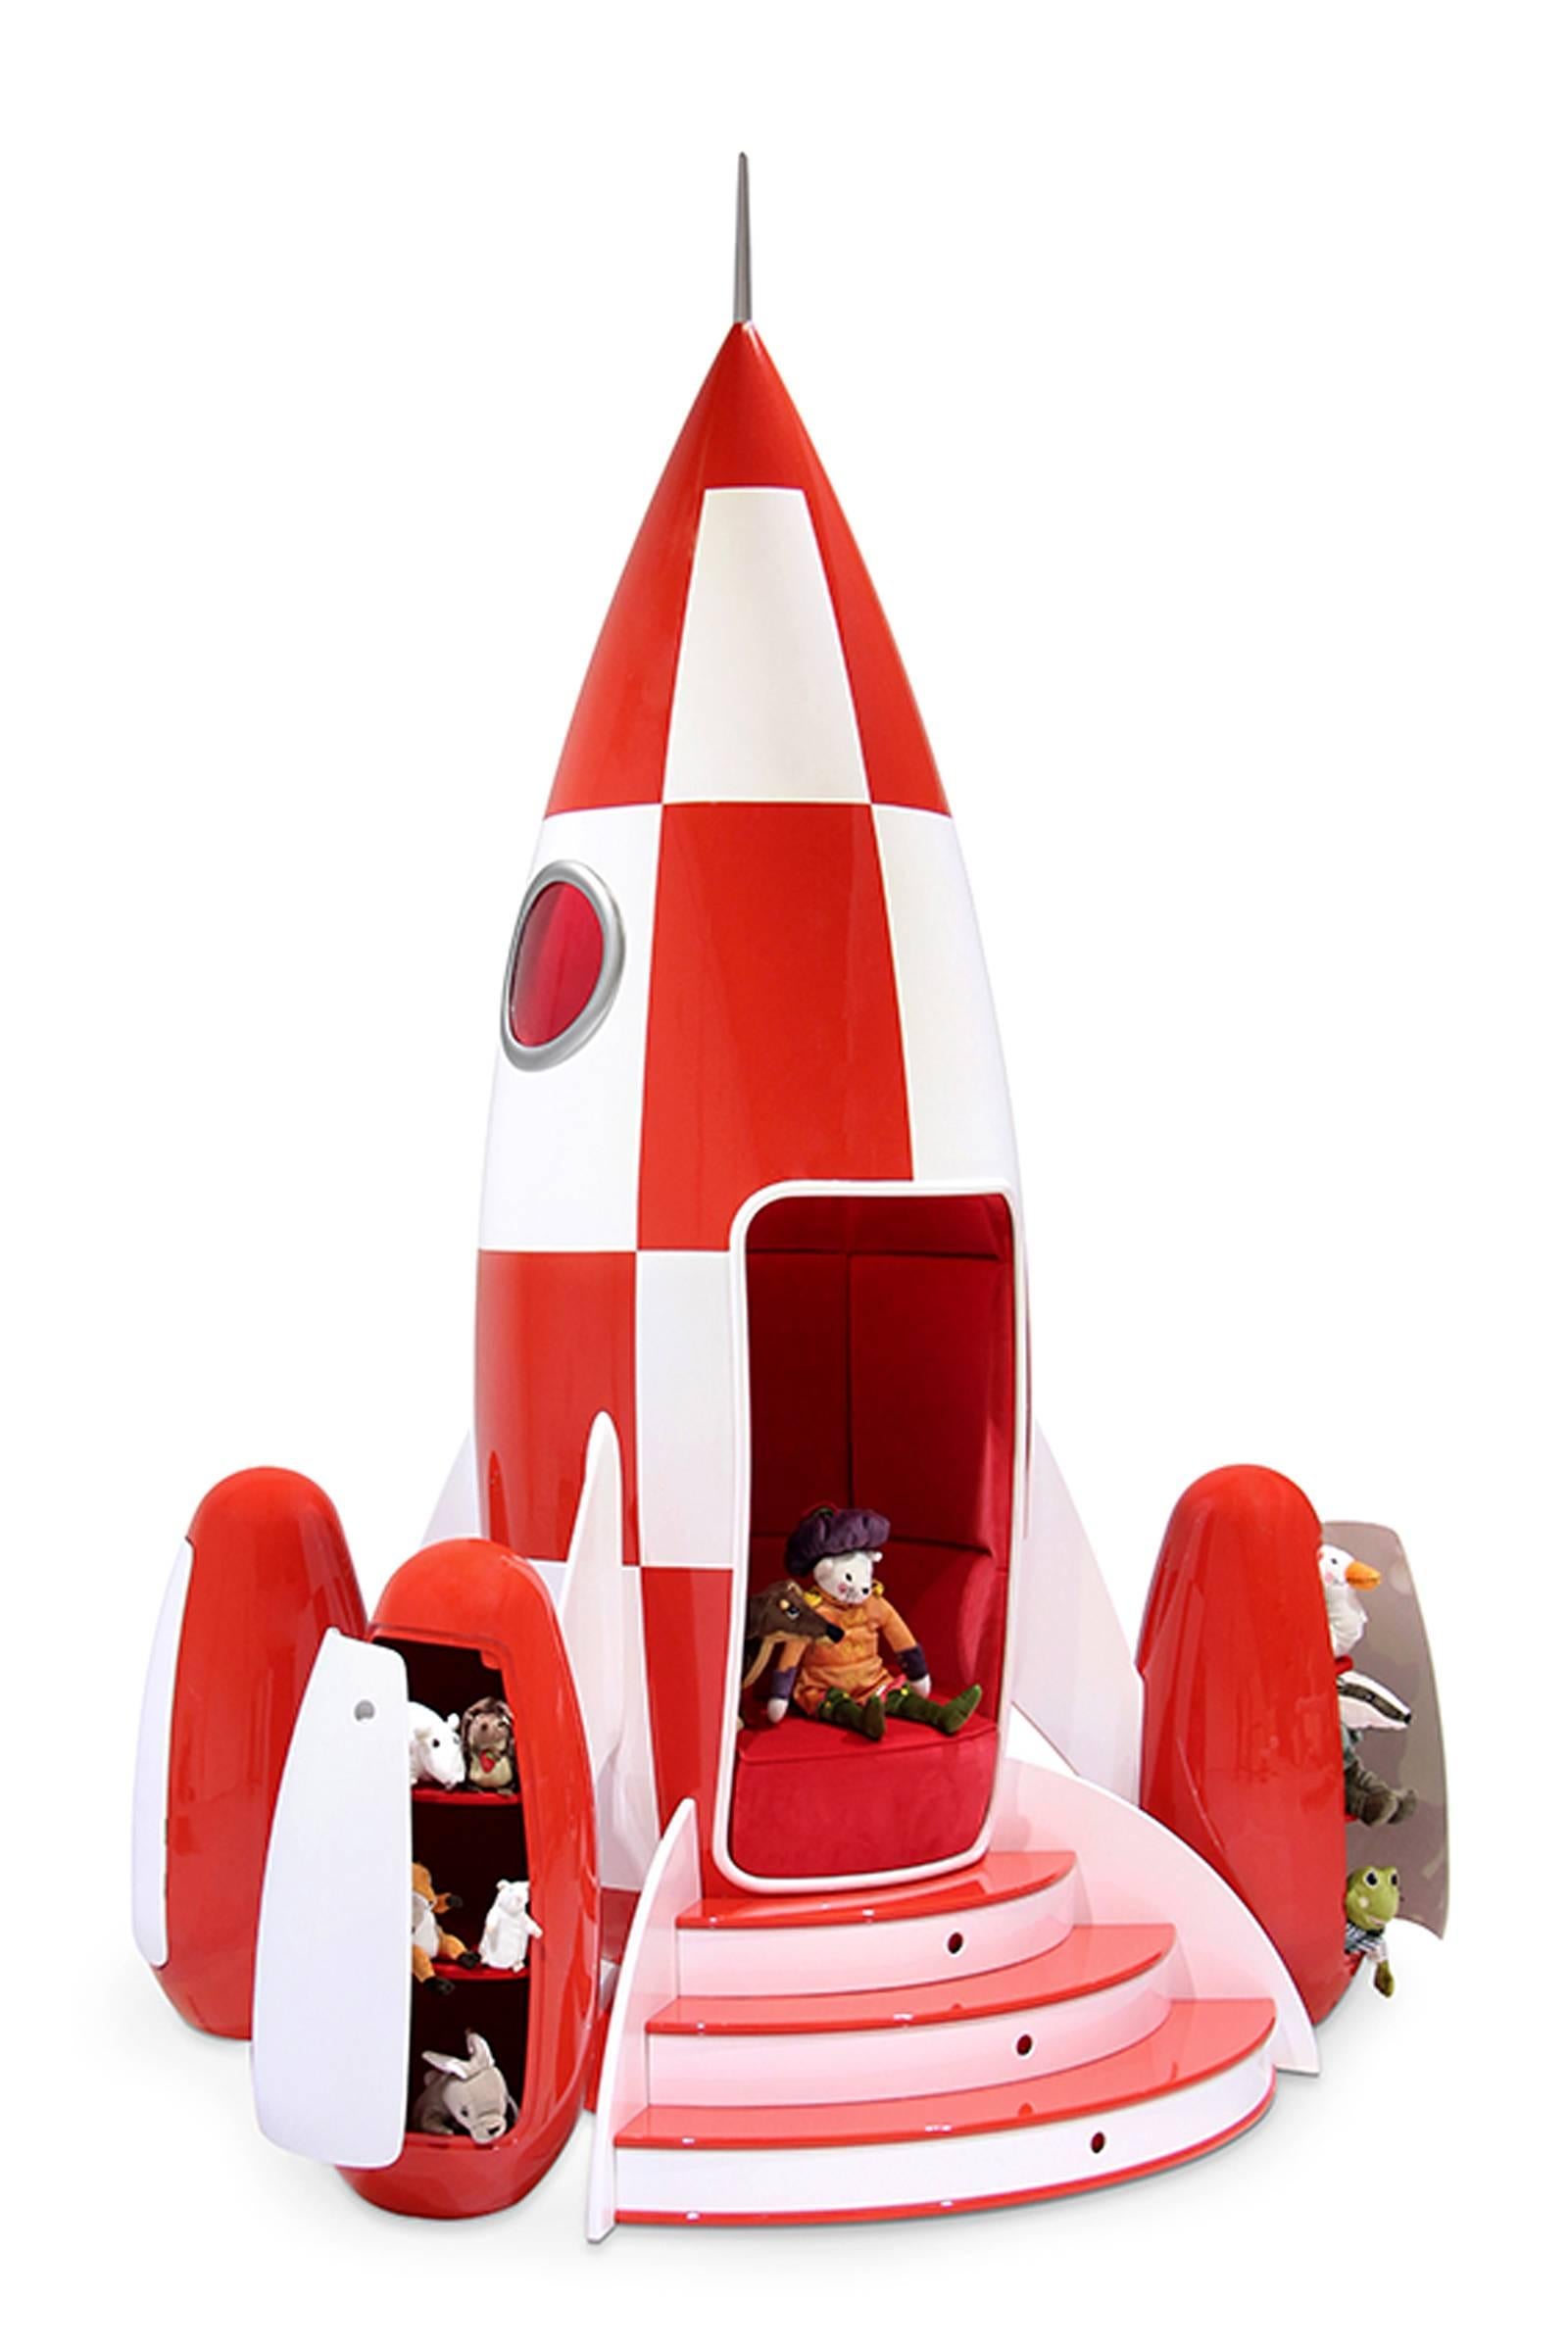 Rocket children chair in fiber glass ideal to go on the moon.
Square are made with masc paint, red velvet upholstery inside.
Sound system and lights are controlled by a mobile apply with 
several options: Choice of music, light effects and sleep